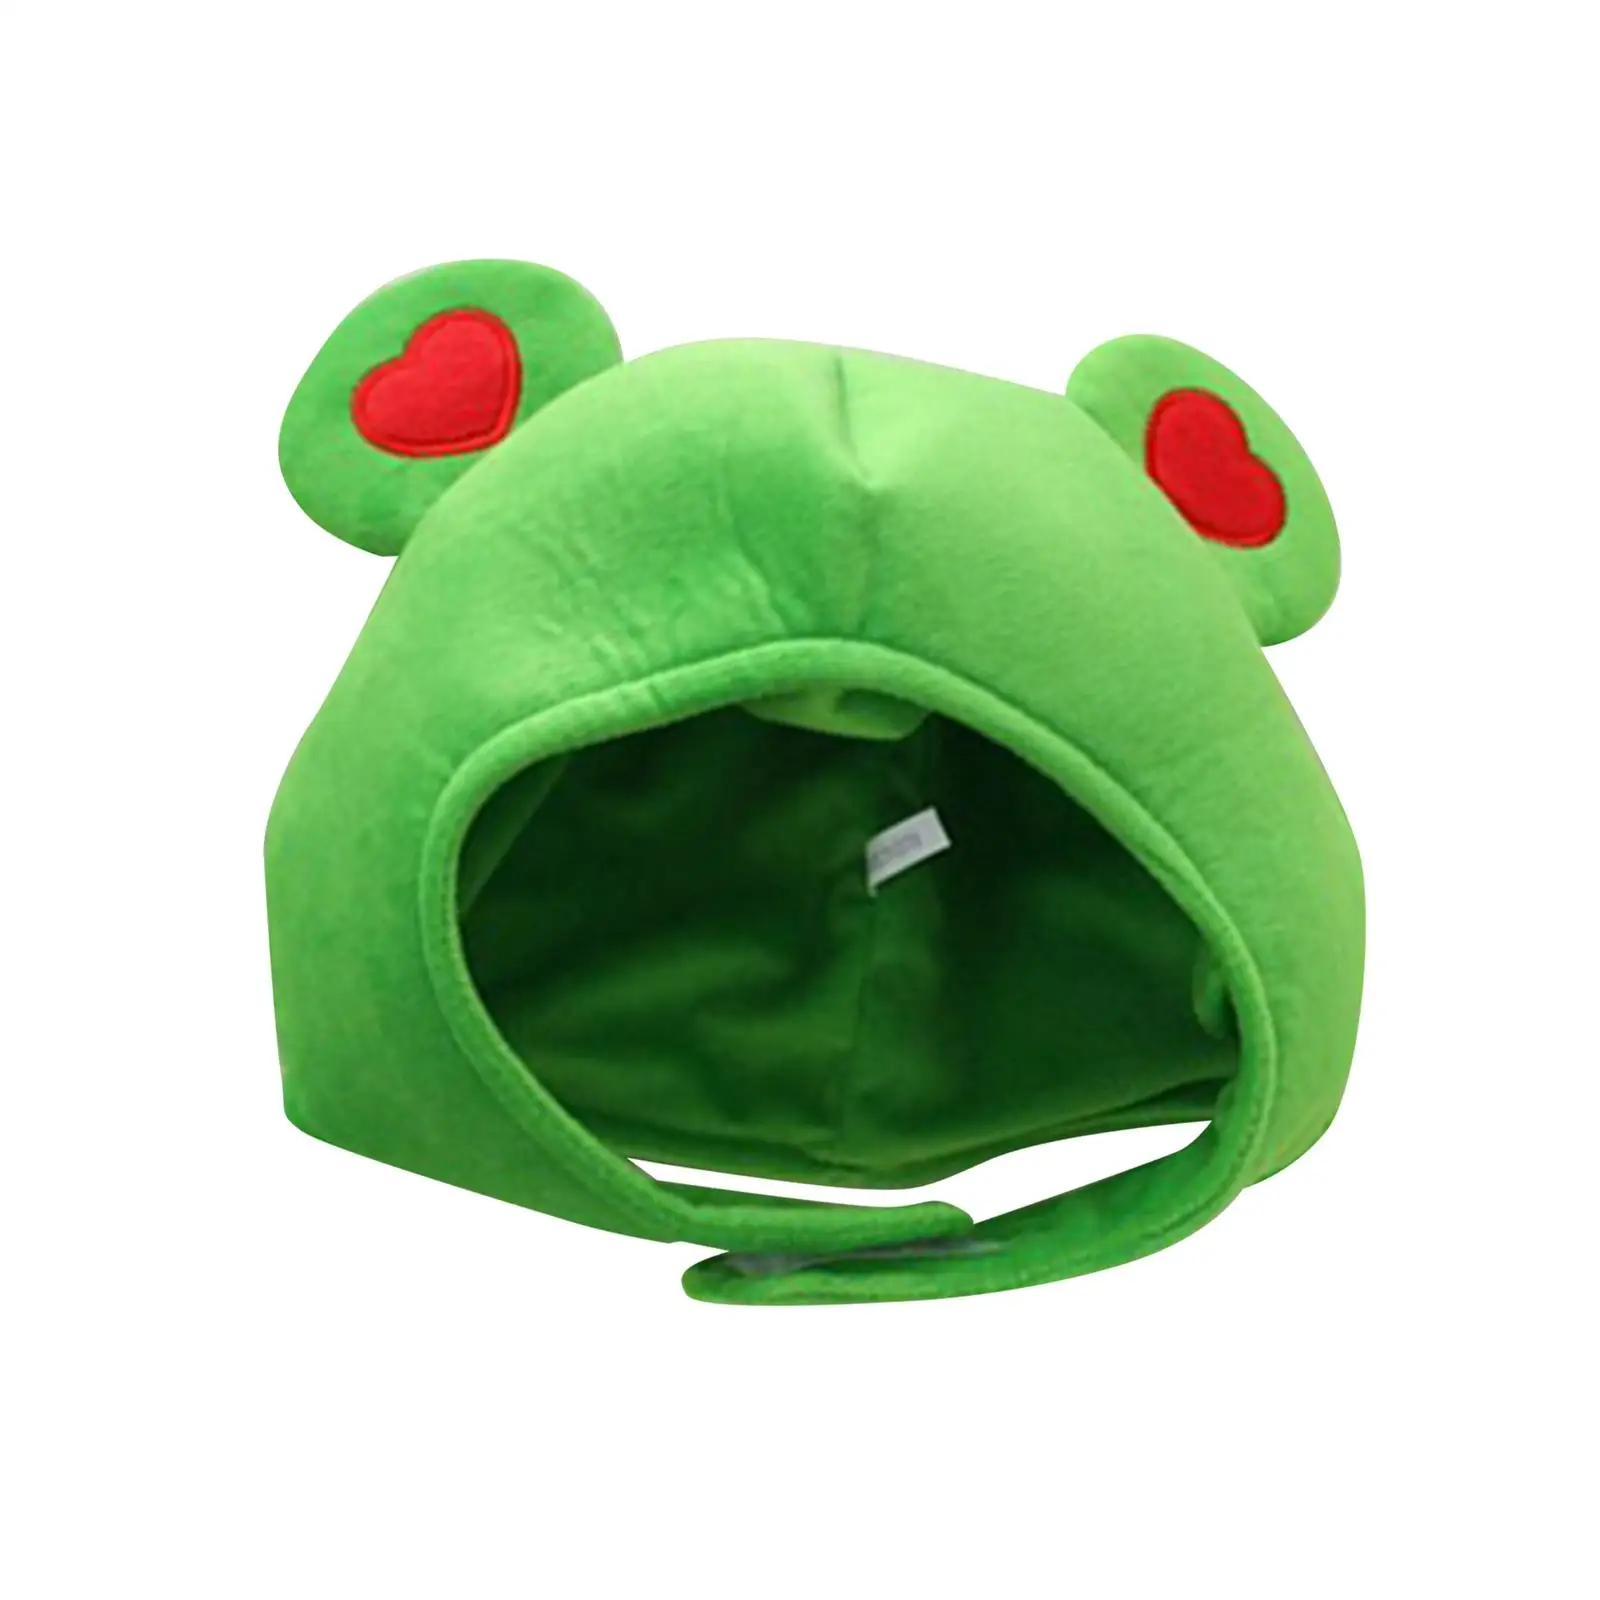 Novelty Plush Frog Hat Fancy Dress Cute Cosplay Adults Warm Winter Photo Props Headwear for Holiday Halloween Party Birthday